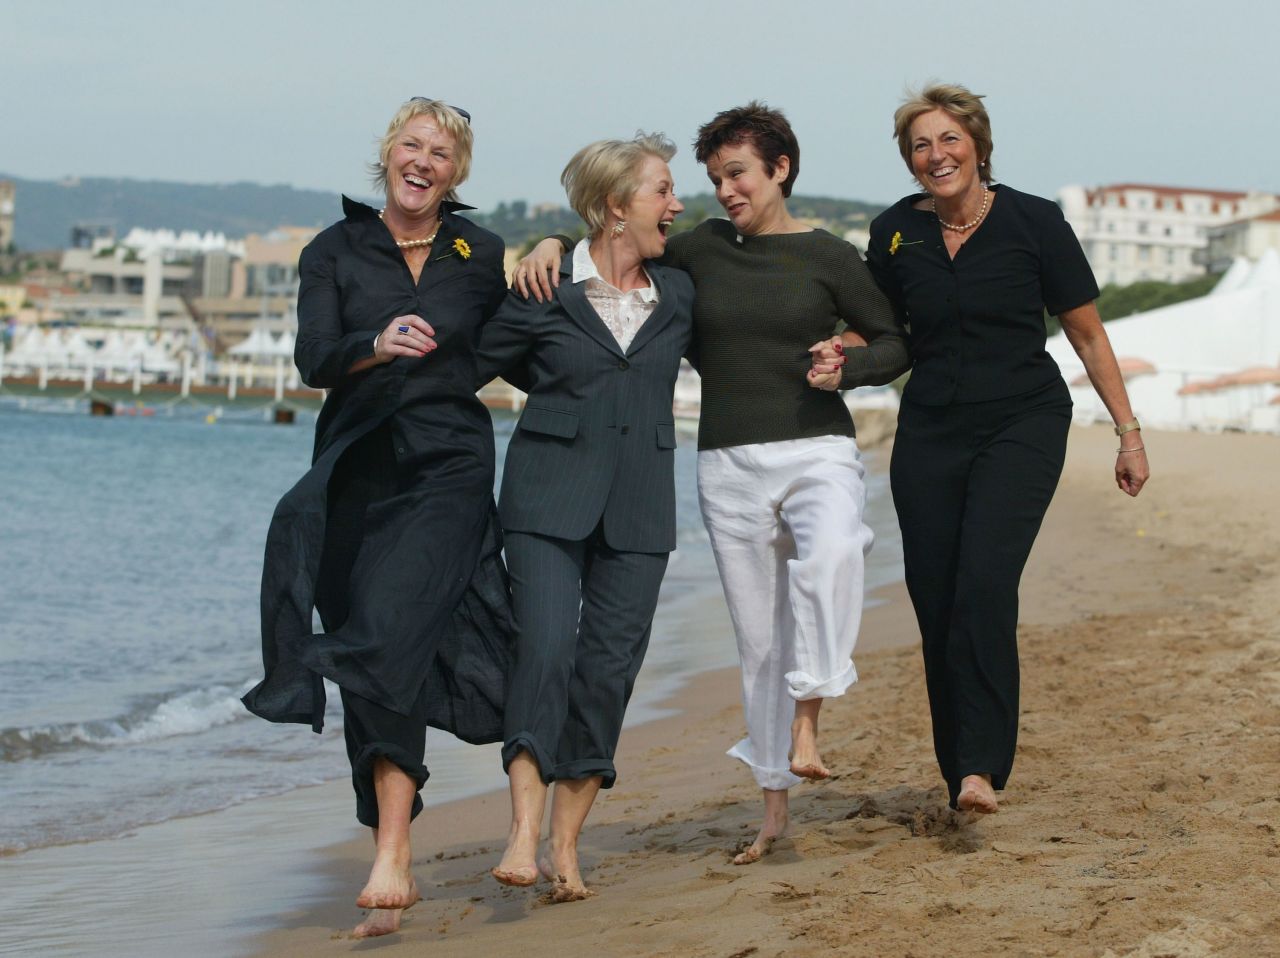 From left, Trisha Stewart, Mirren, Angela Baker and Julie Walters pose during a photocall for the film "Calendar Girls" during the Cannes Film Festival in France in 2003.